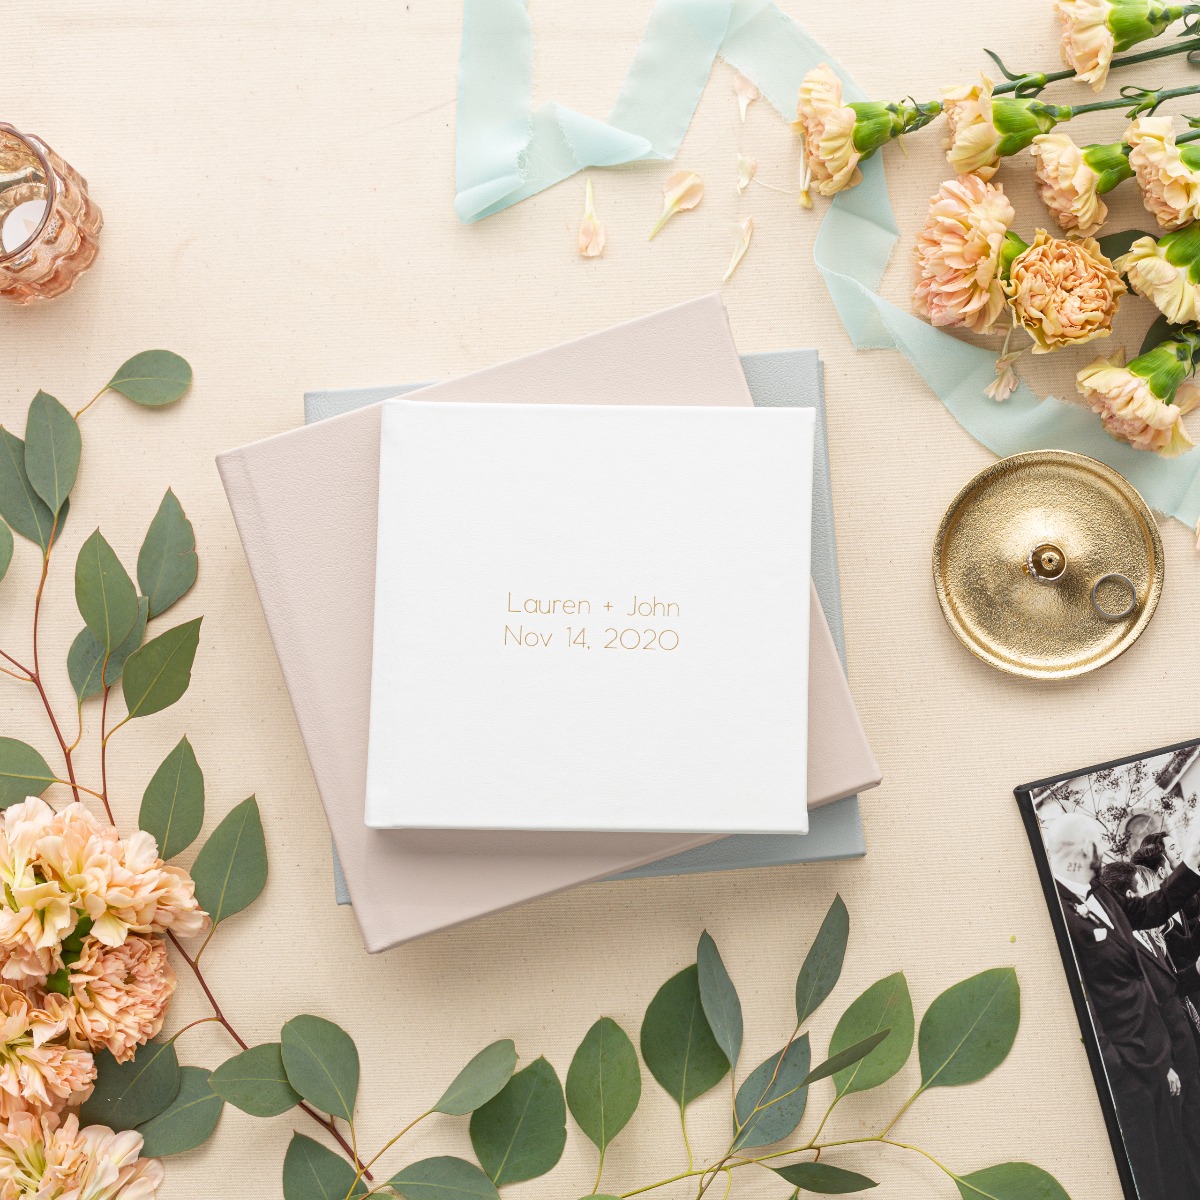 Tips for Creating the Perfect Wedding Album